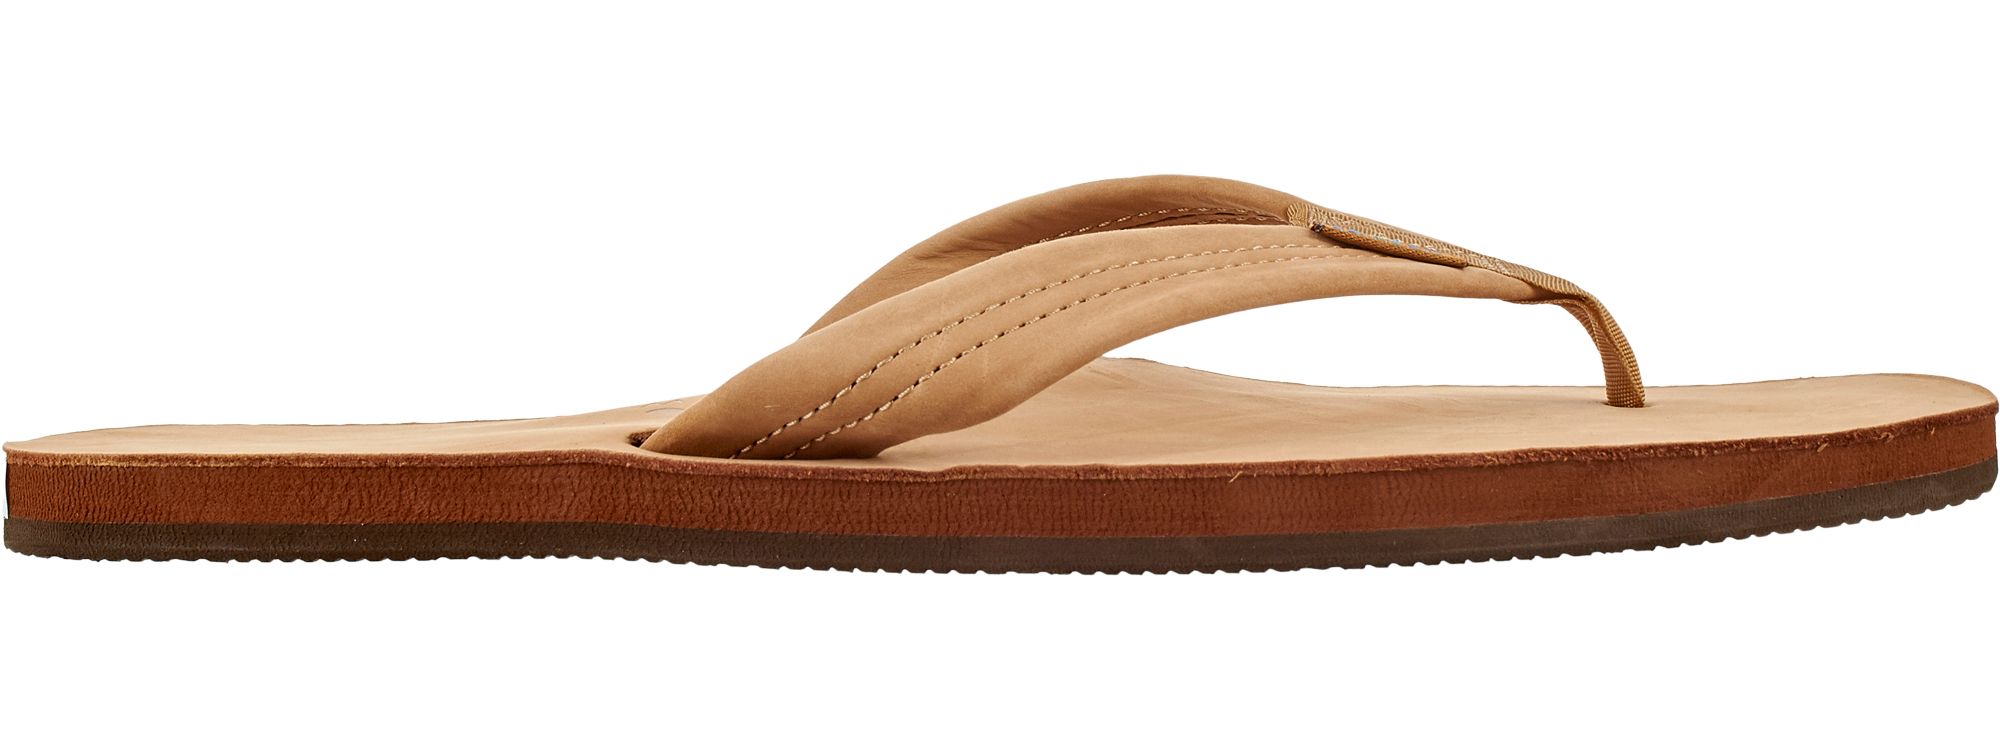 rainbow sandals single layer premier leather with arch support